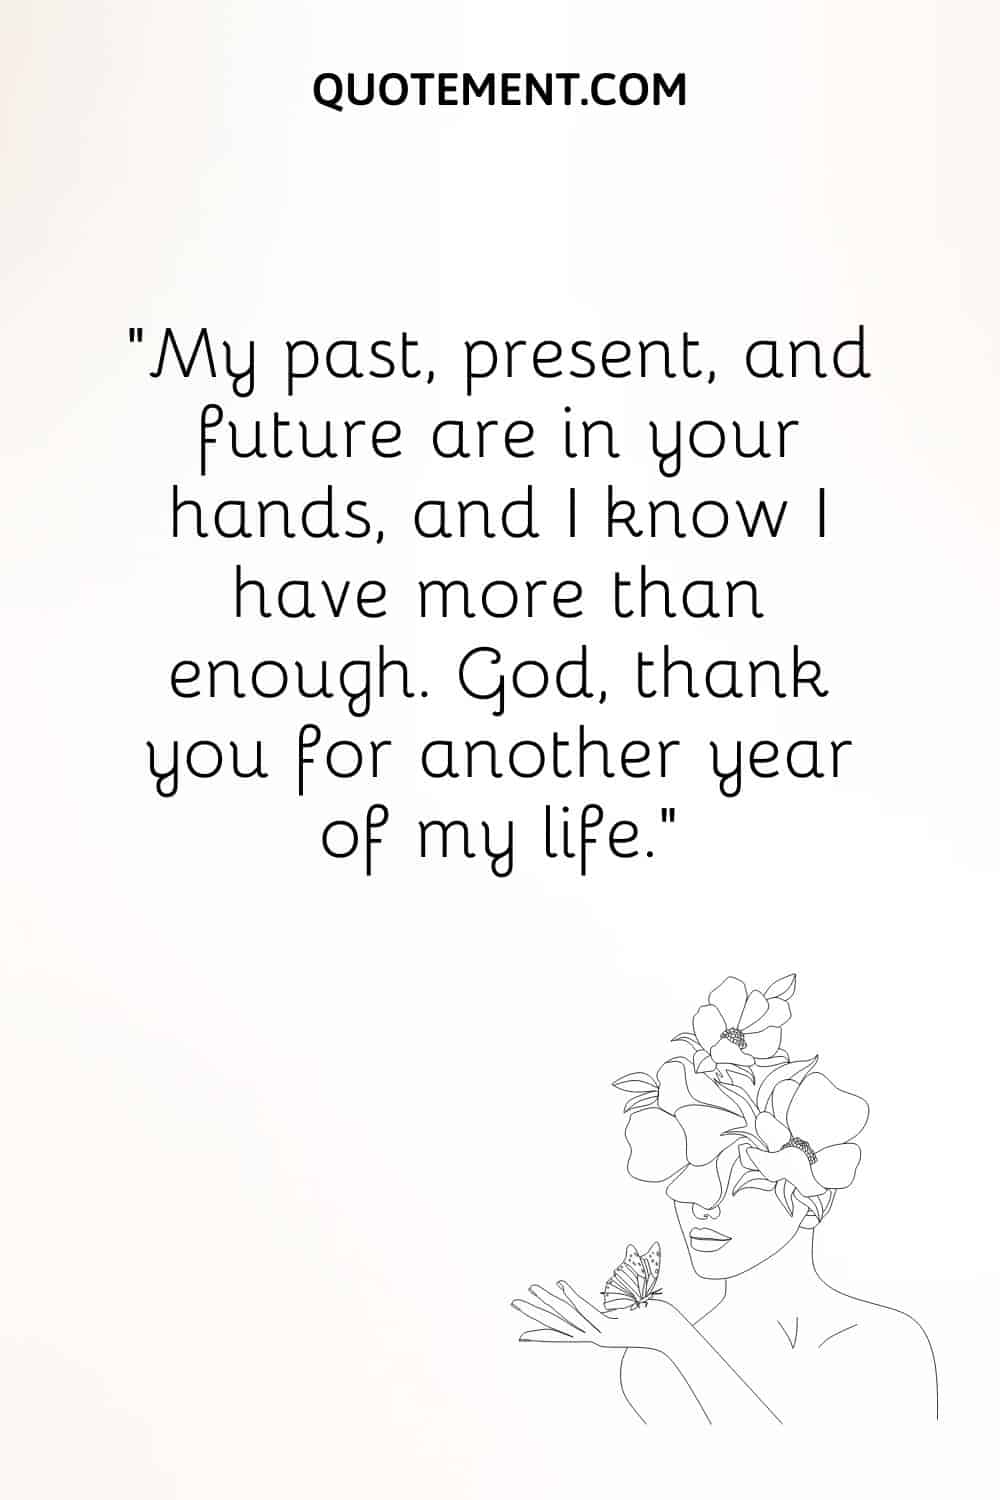 My past, present, and future are in your hands, and I know I have more than enough.